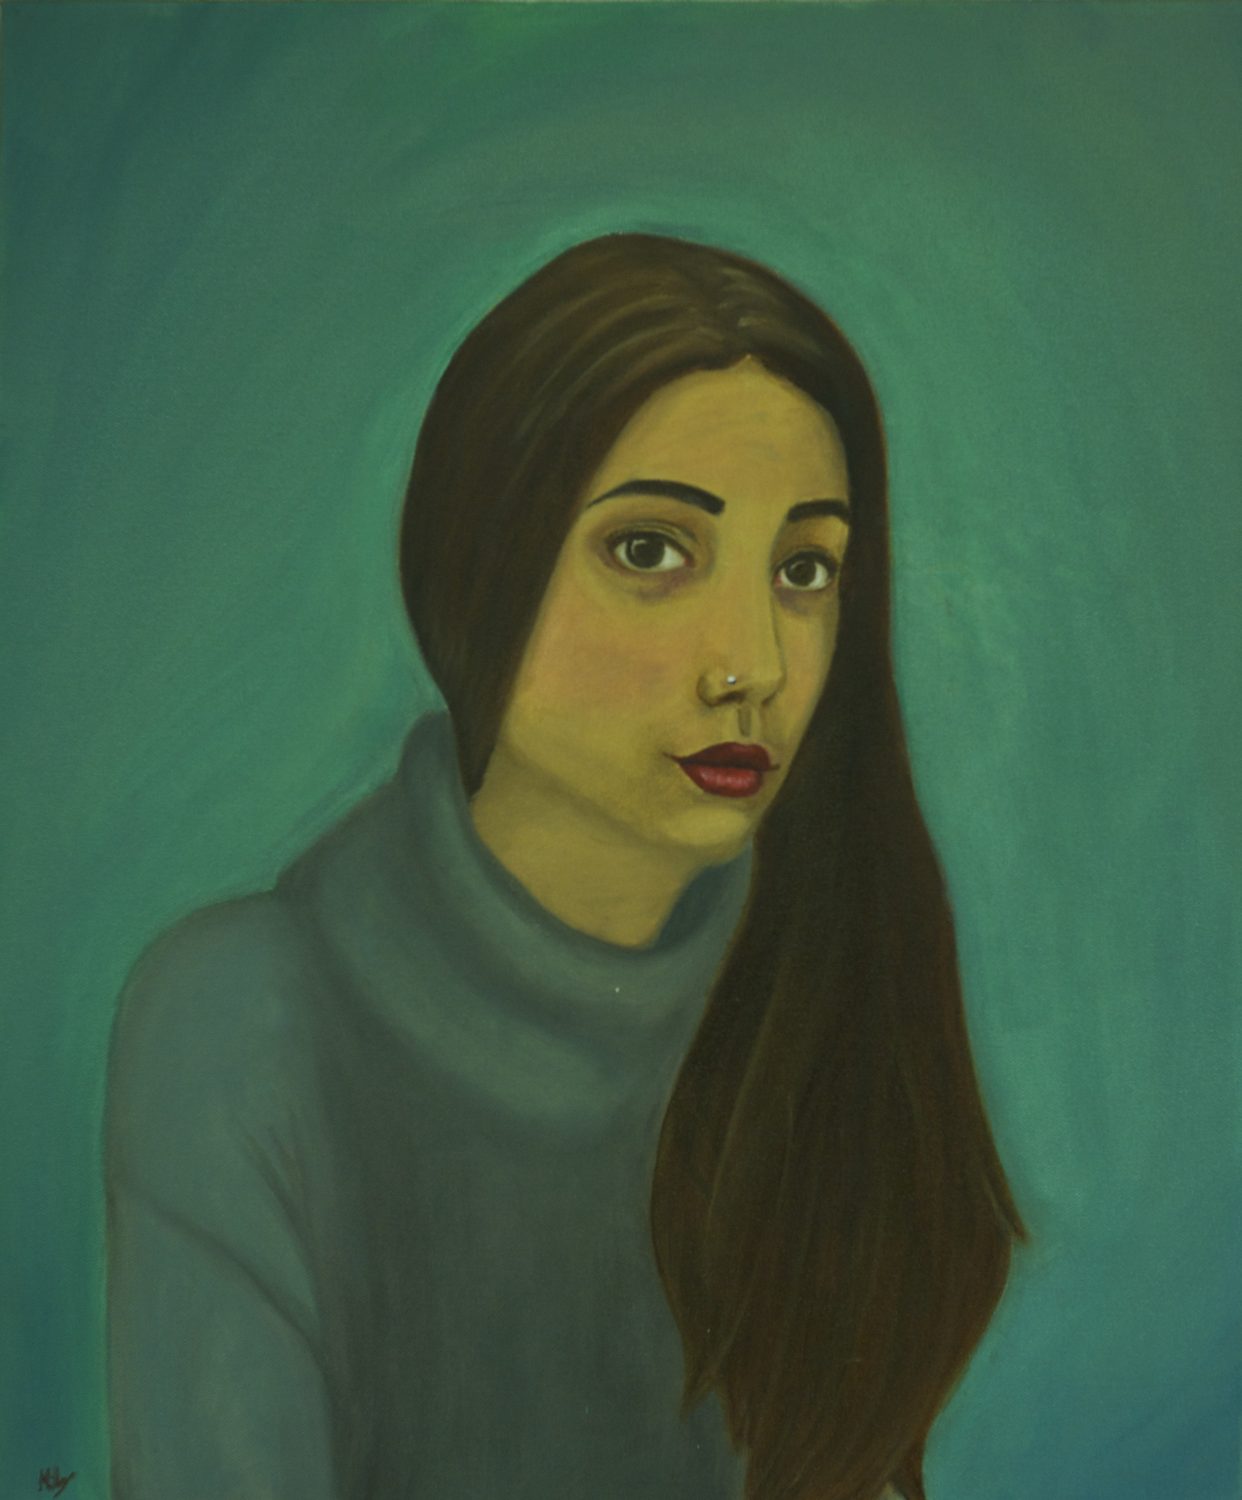 thumbnail of Self-Portrait by Mildred Nolasco. Medium: Oil on Canvas. Size 24 x 10 inches